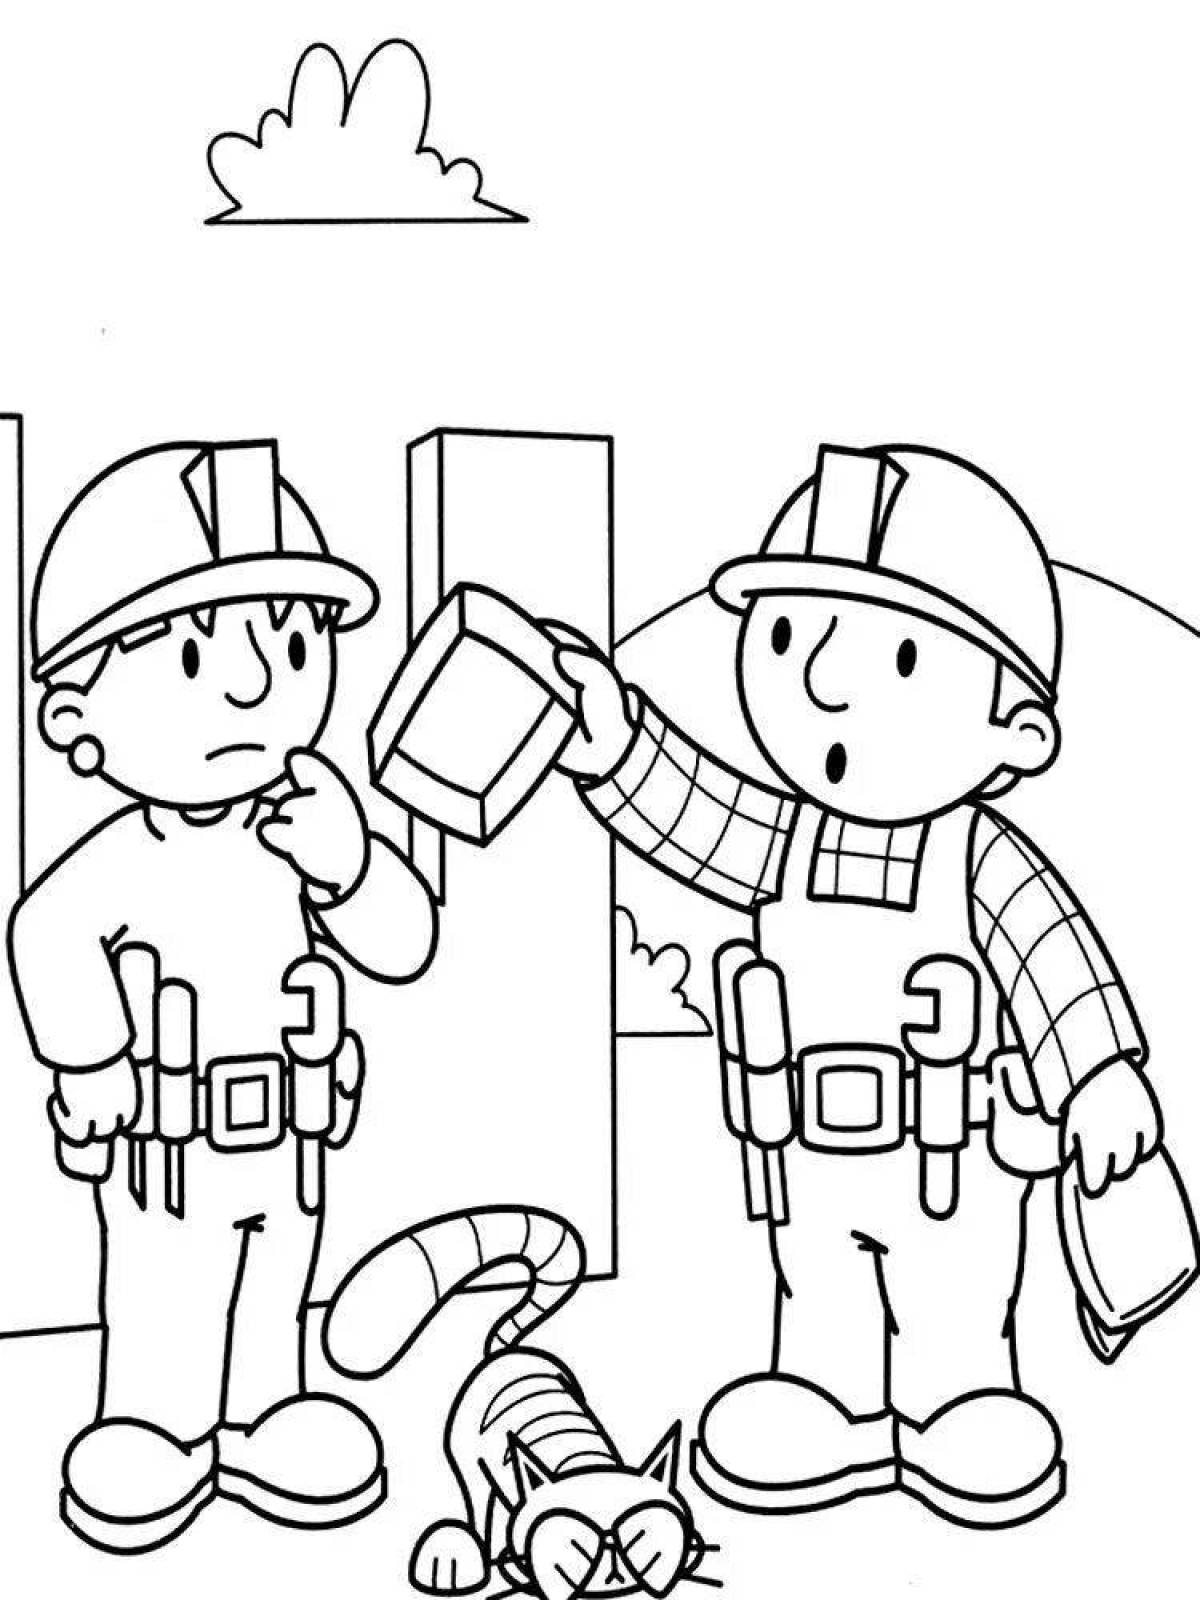 Attracting occupational safety pictures through the eyes of children